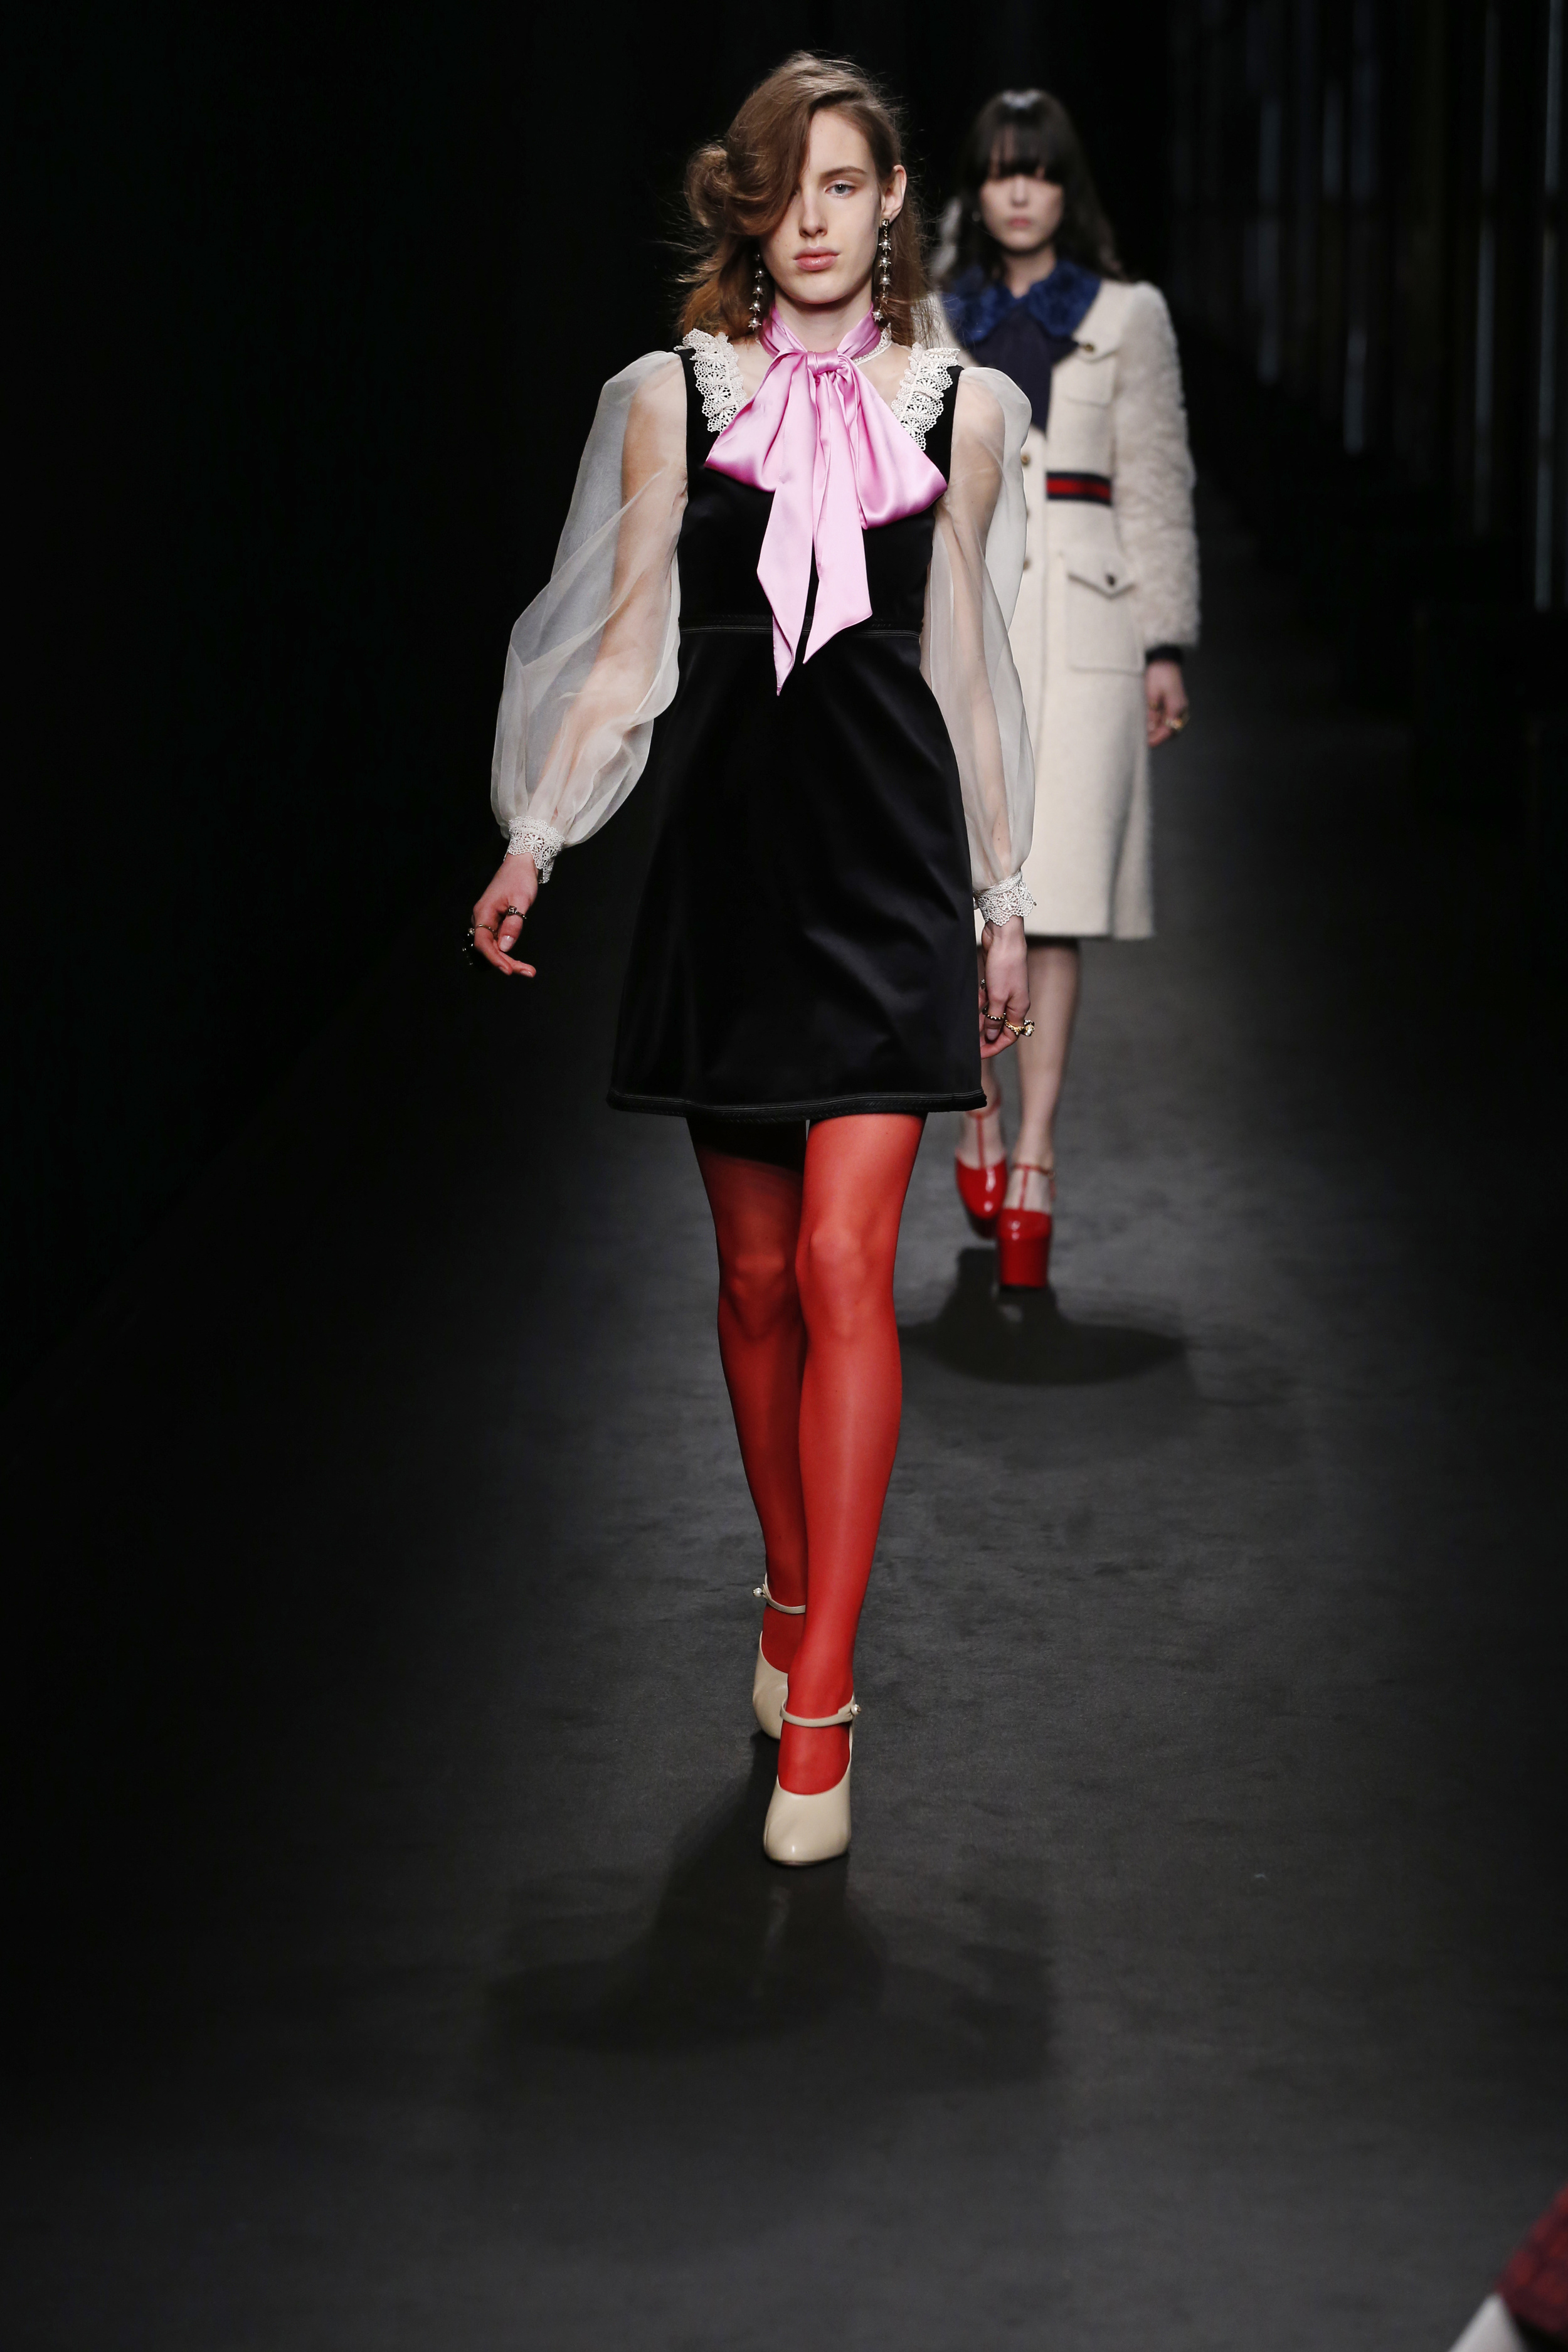 Love me, Gucci me: FW16 Runway Report — PAM | Allier